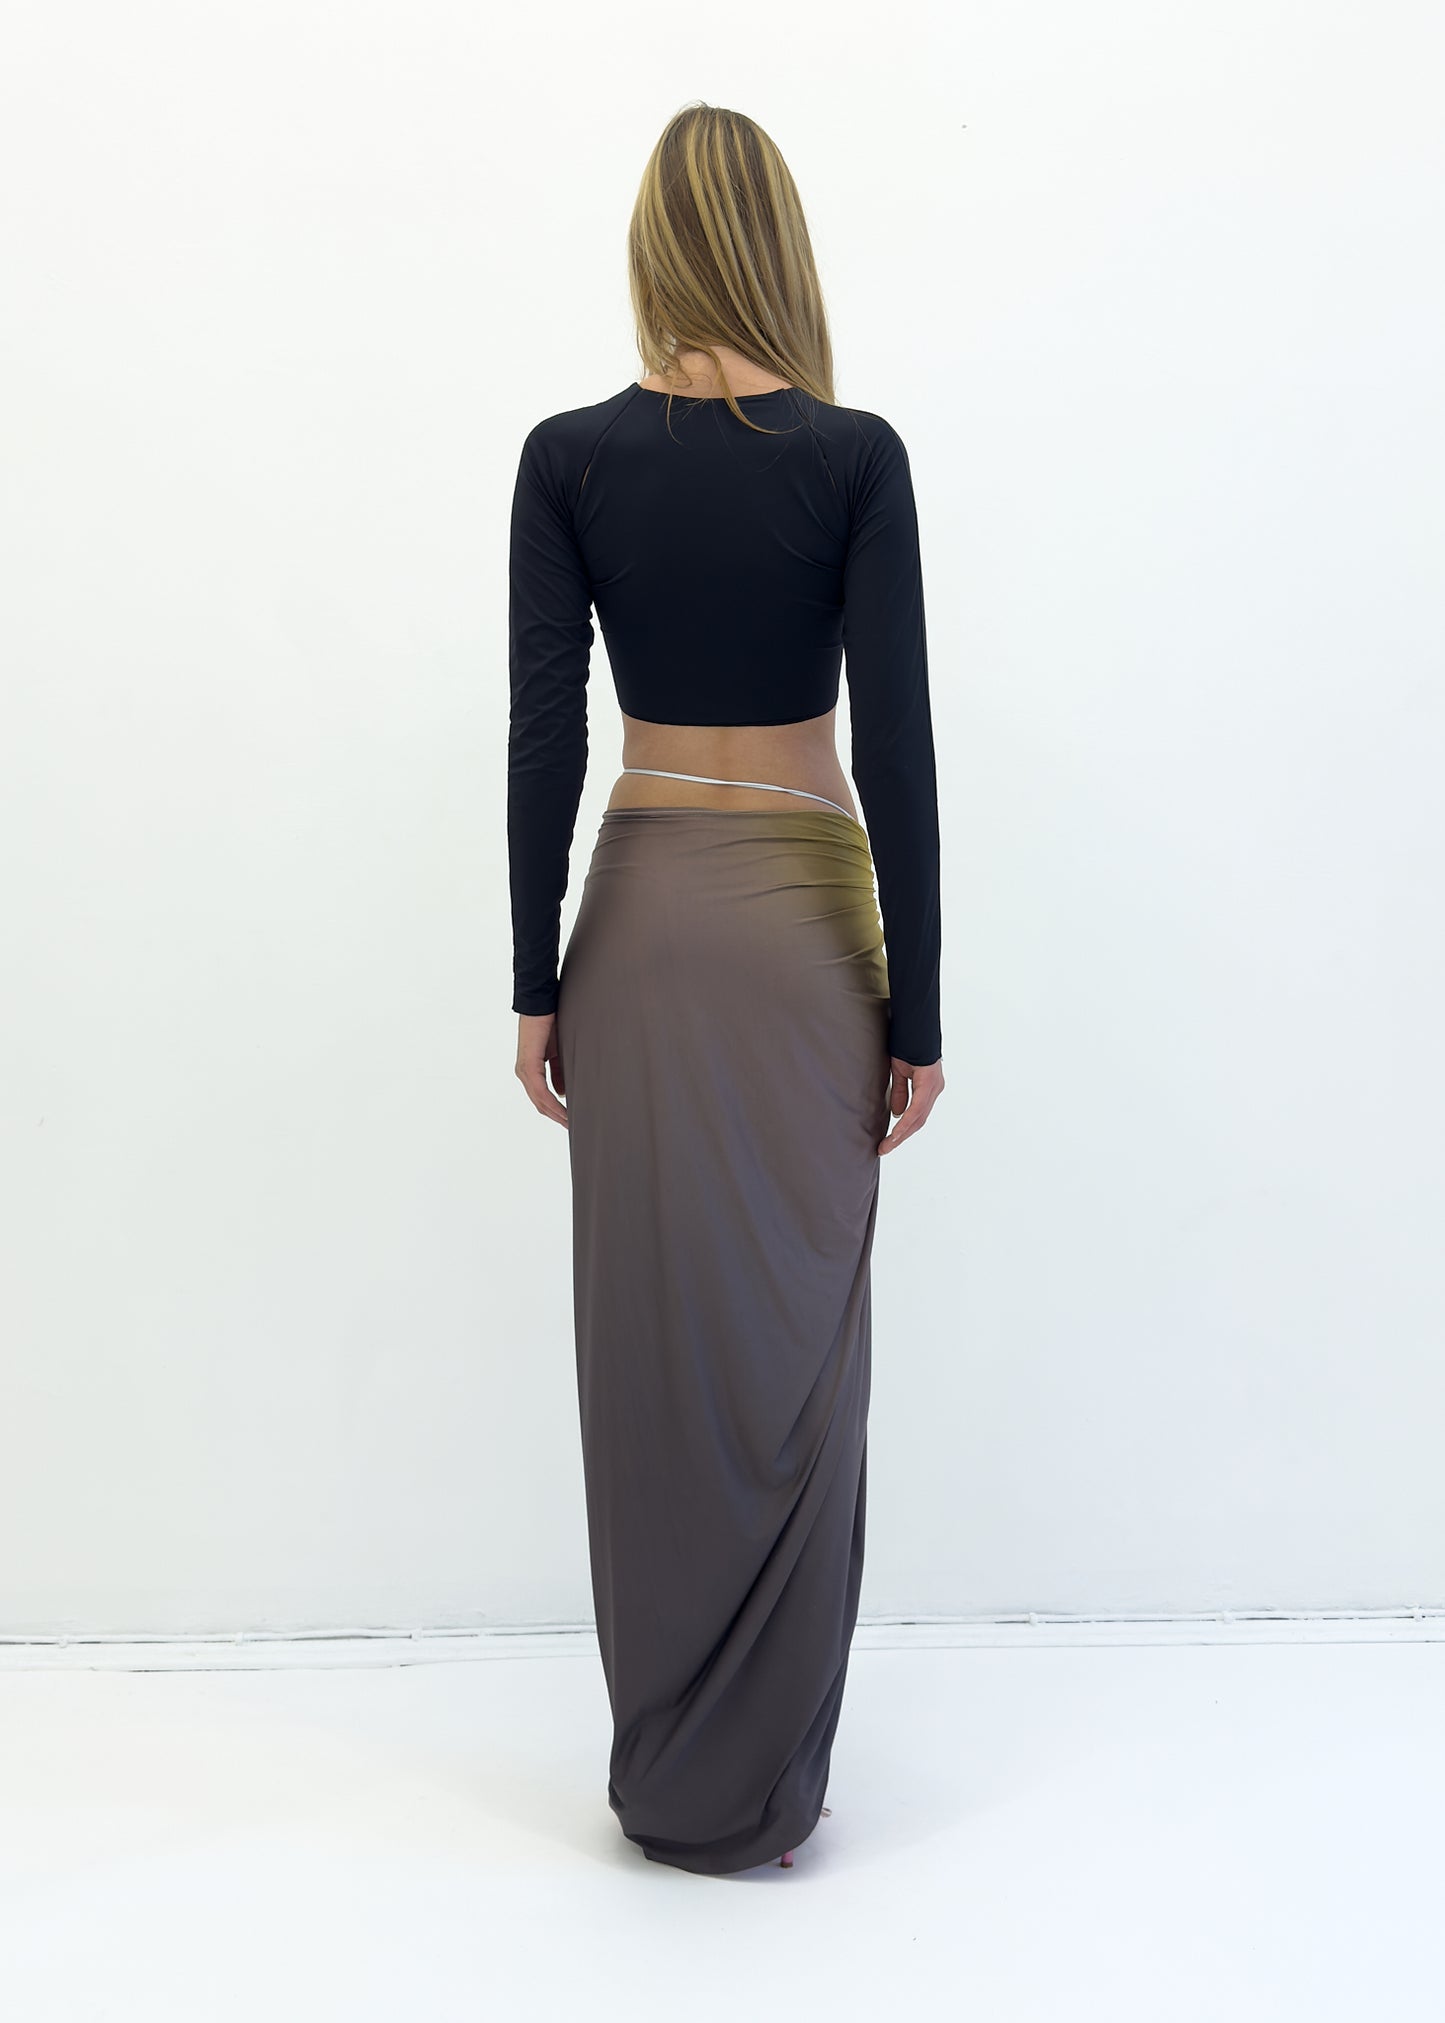 Signature maxi skirt in olive/brown